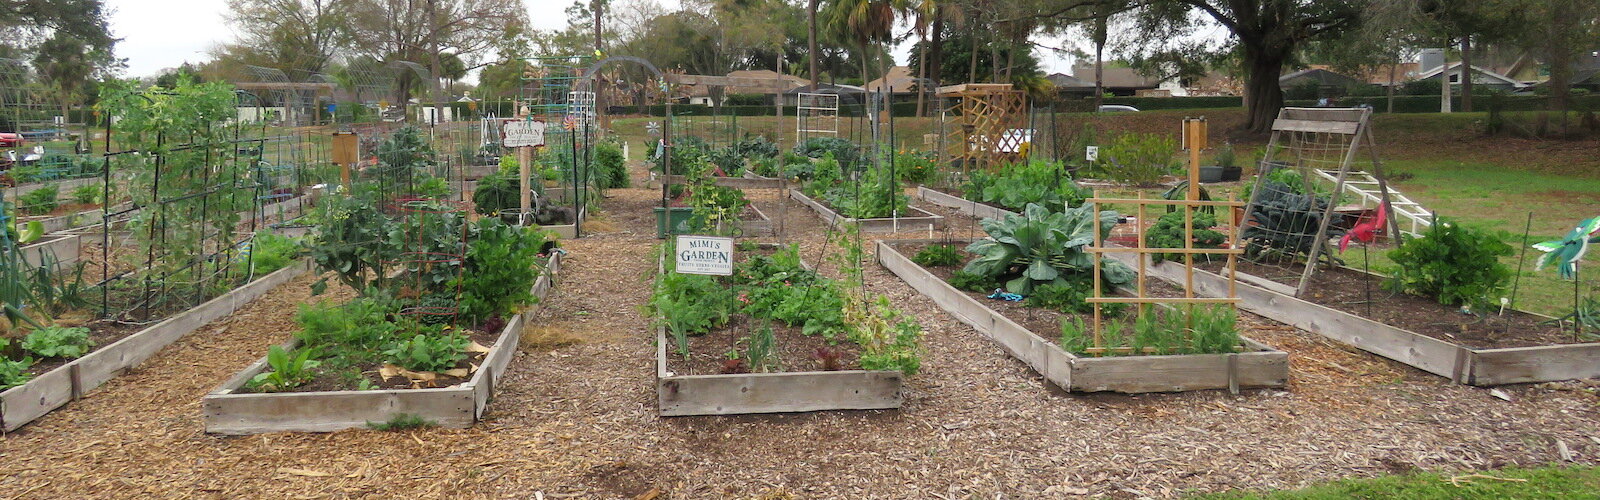 Hillsborough County’s “first garden park” features over 70 raised cedar beds, mostly measuring 4 X 16 feet and tended by seasonal gardeners who are passionate about their native vegetables, flowers and being part of what has become a family.